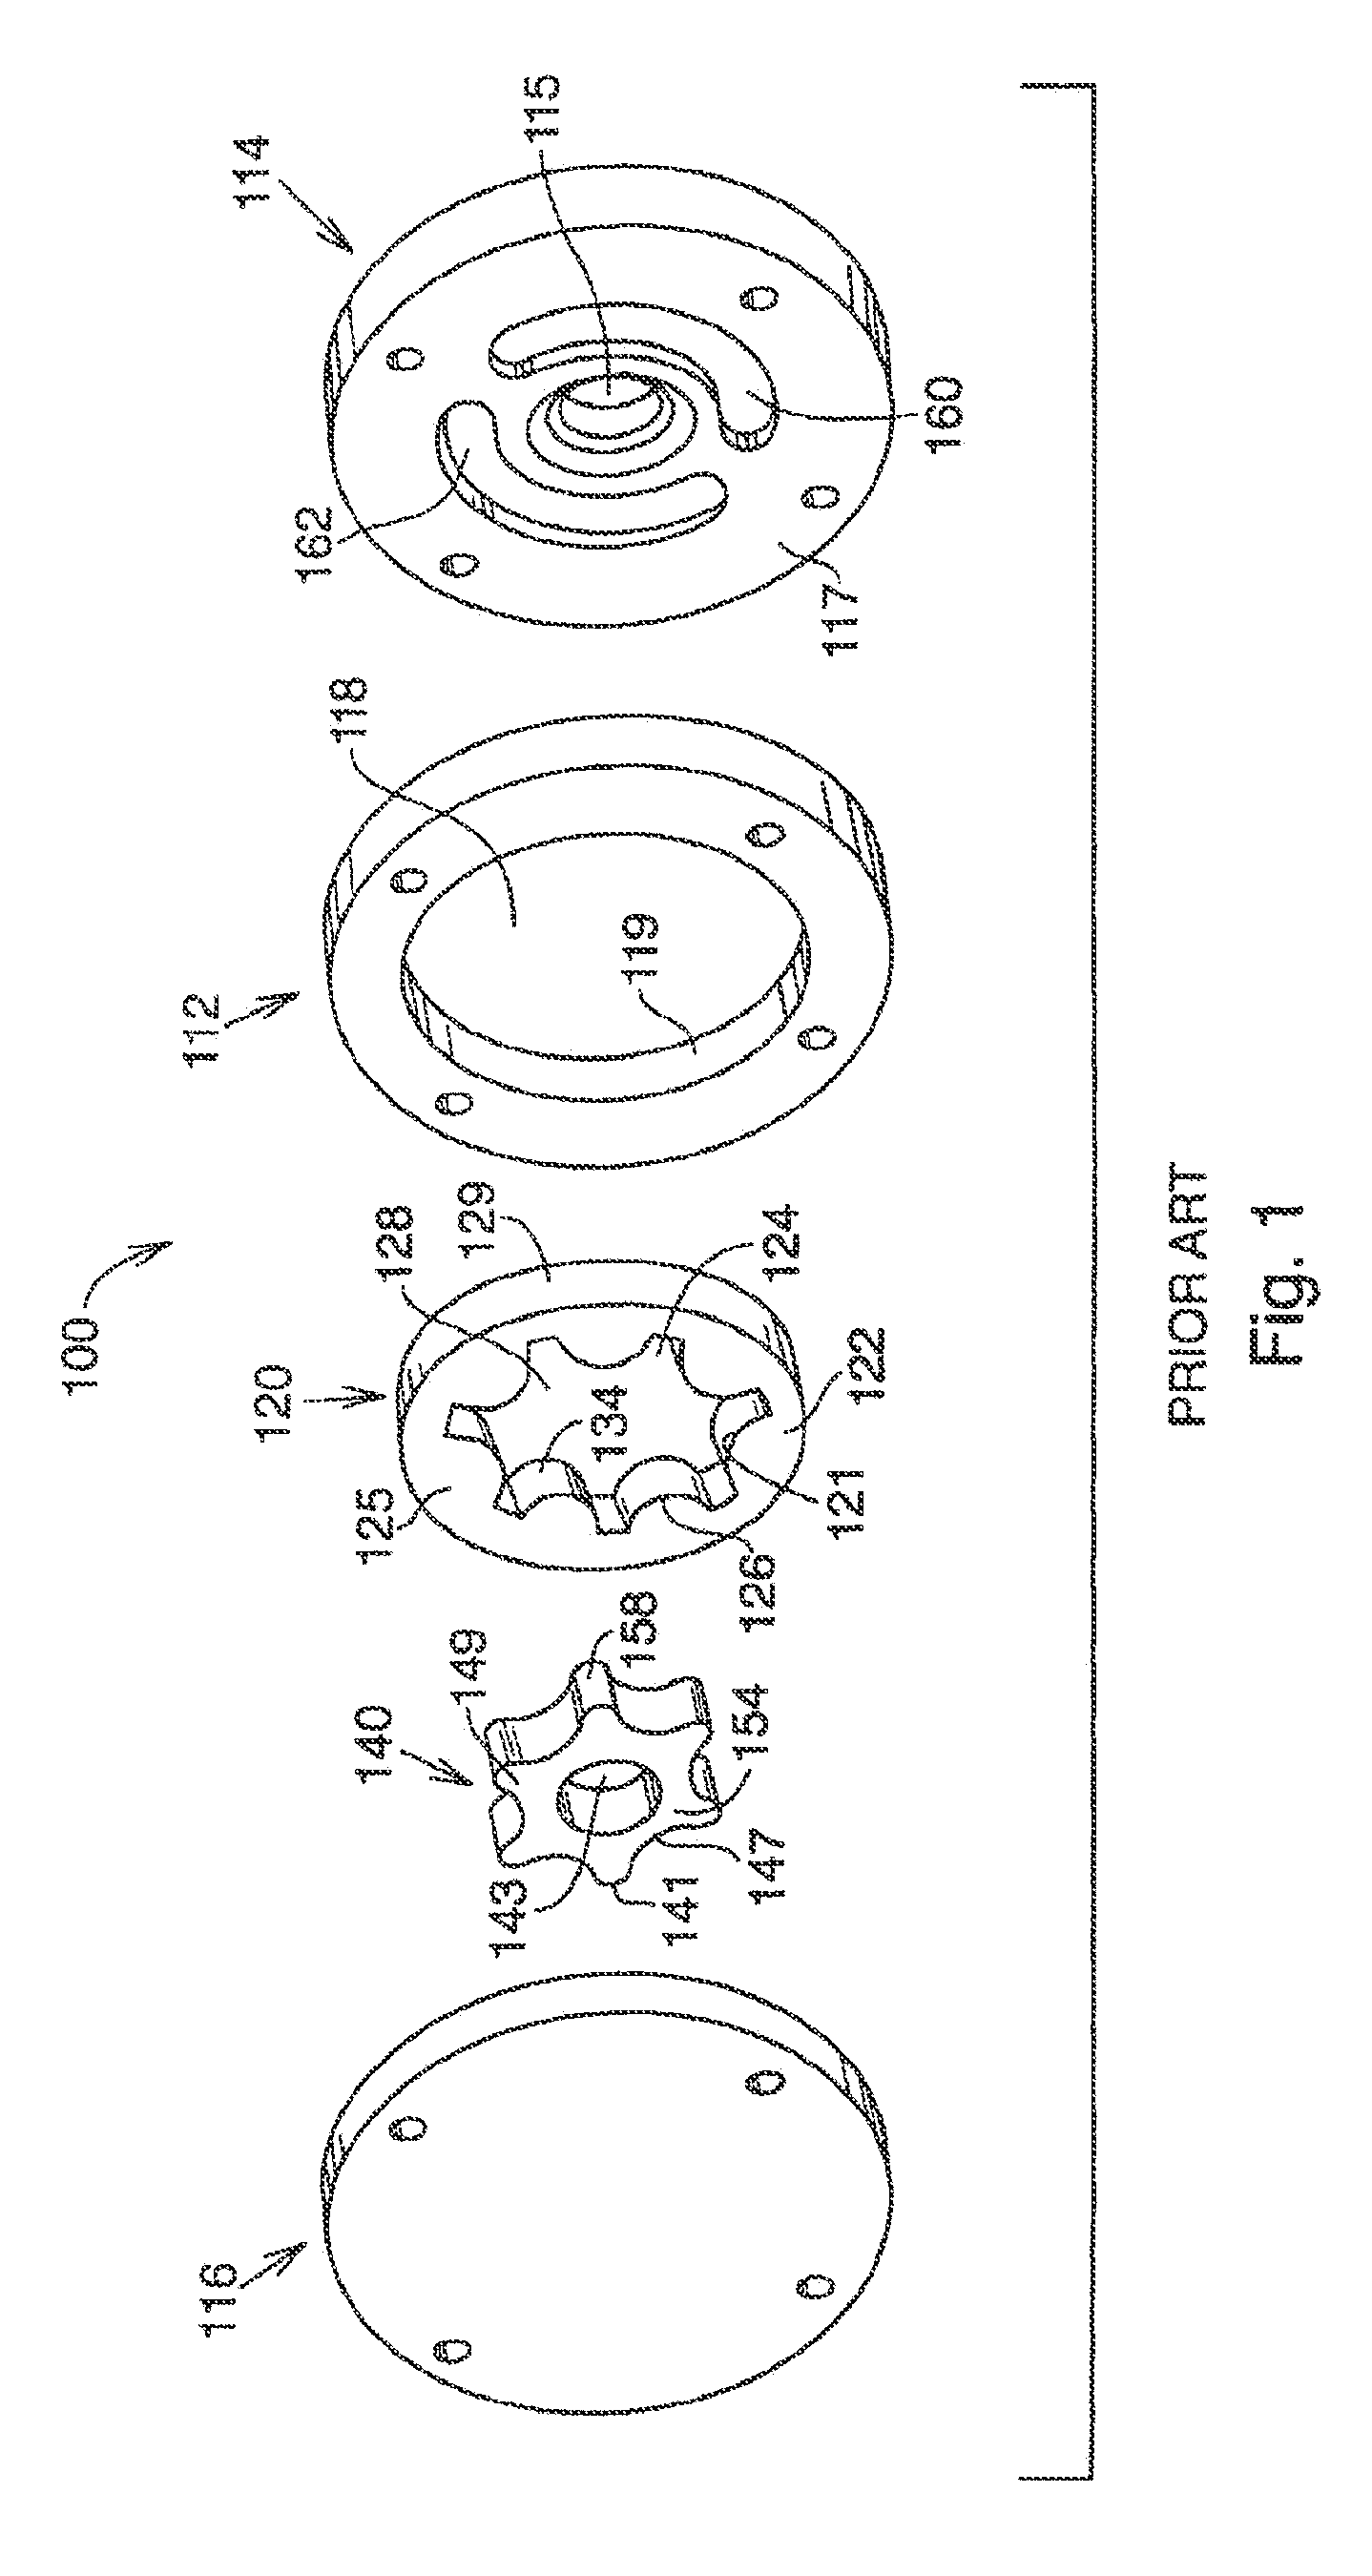 Fluid energy transfer device with improved bearing assemblies